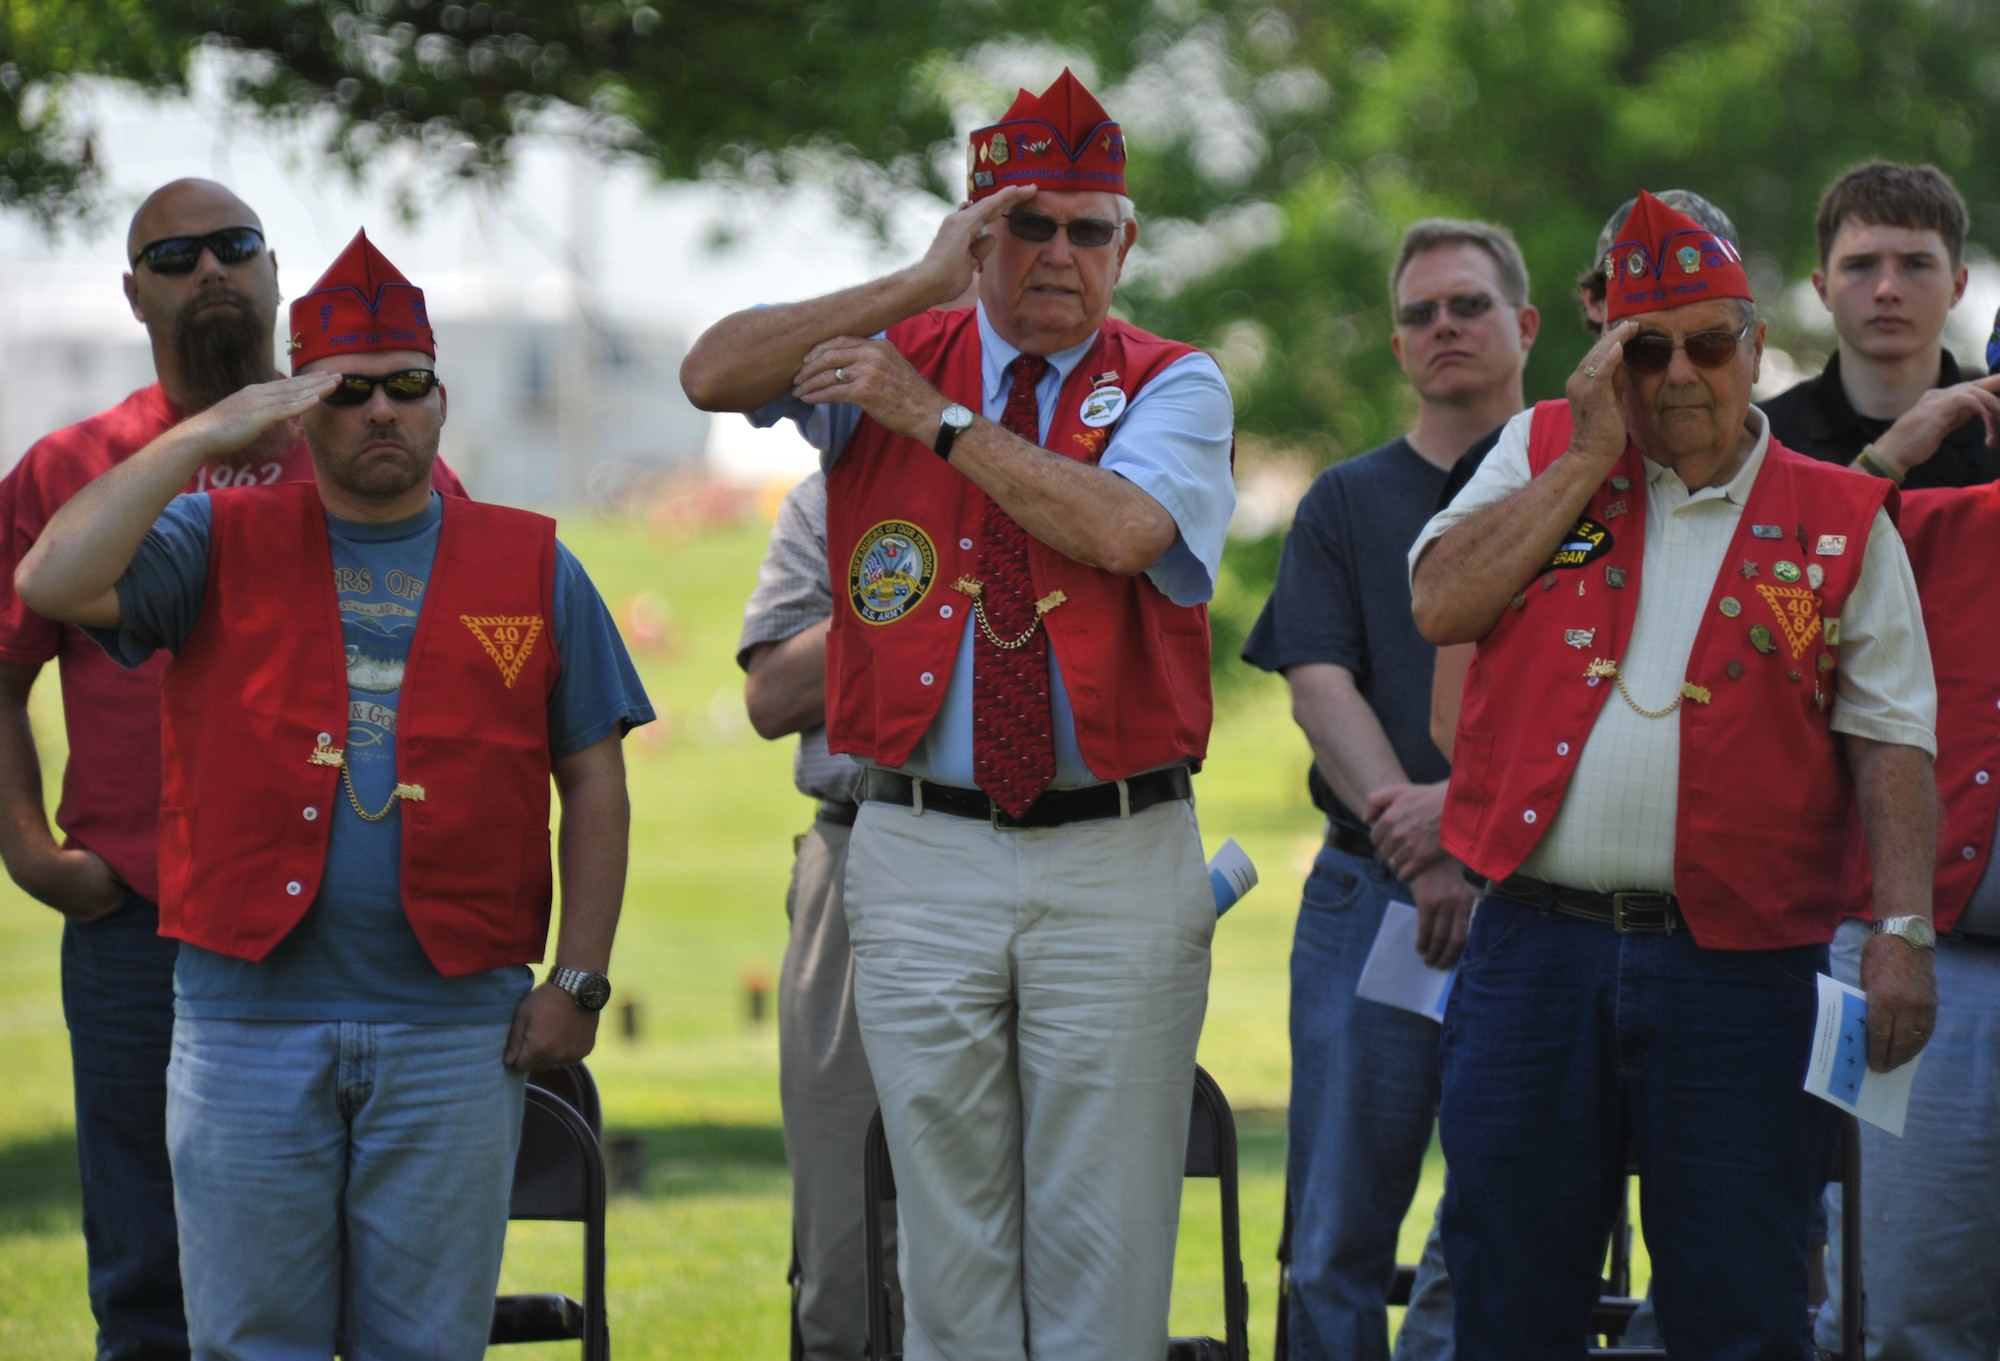 Members from the local Veterans of Foreign Wars chapter salute while the flag is raised during a wreath-laying ceremony for 2nd Lt. George Whiteman May 18, 2013, in Sedalia, Mo. Whiteman, a Sedalia native, was one of the first Airmen to die during World War II when the Japanese attacked Pearl Harbor.  (U.S. Air Force photo by Senior Airman Brigitte N. Brantley/Released)